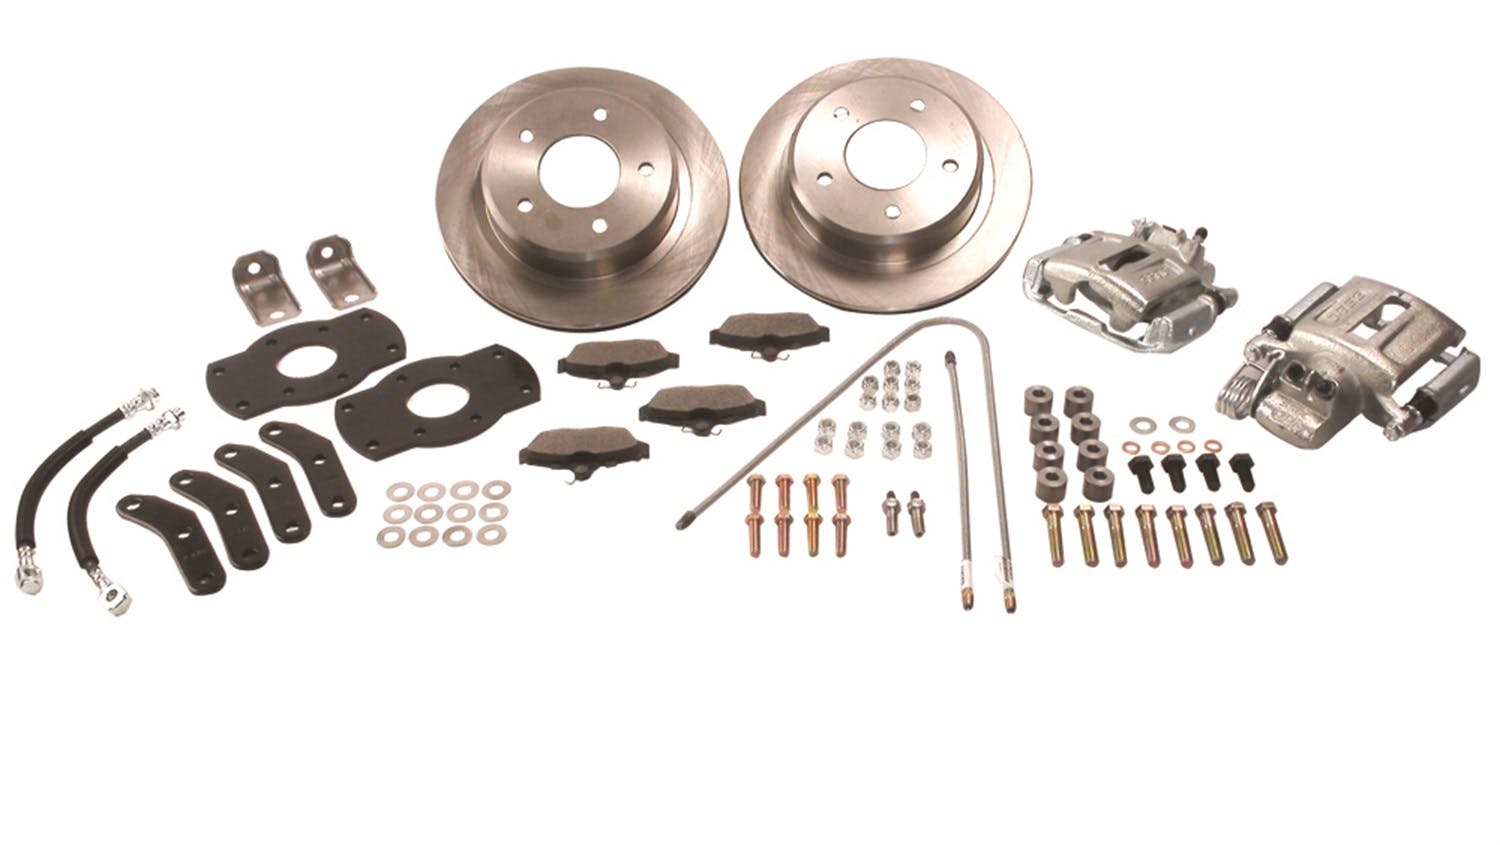 Stainless Steel Brakes A128-1BK Kit A128-1 w/black calipers